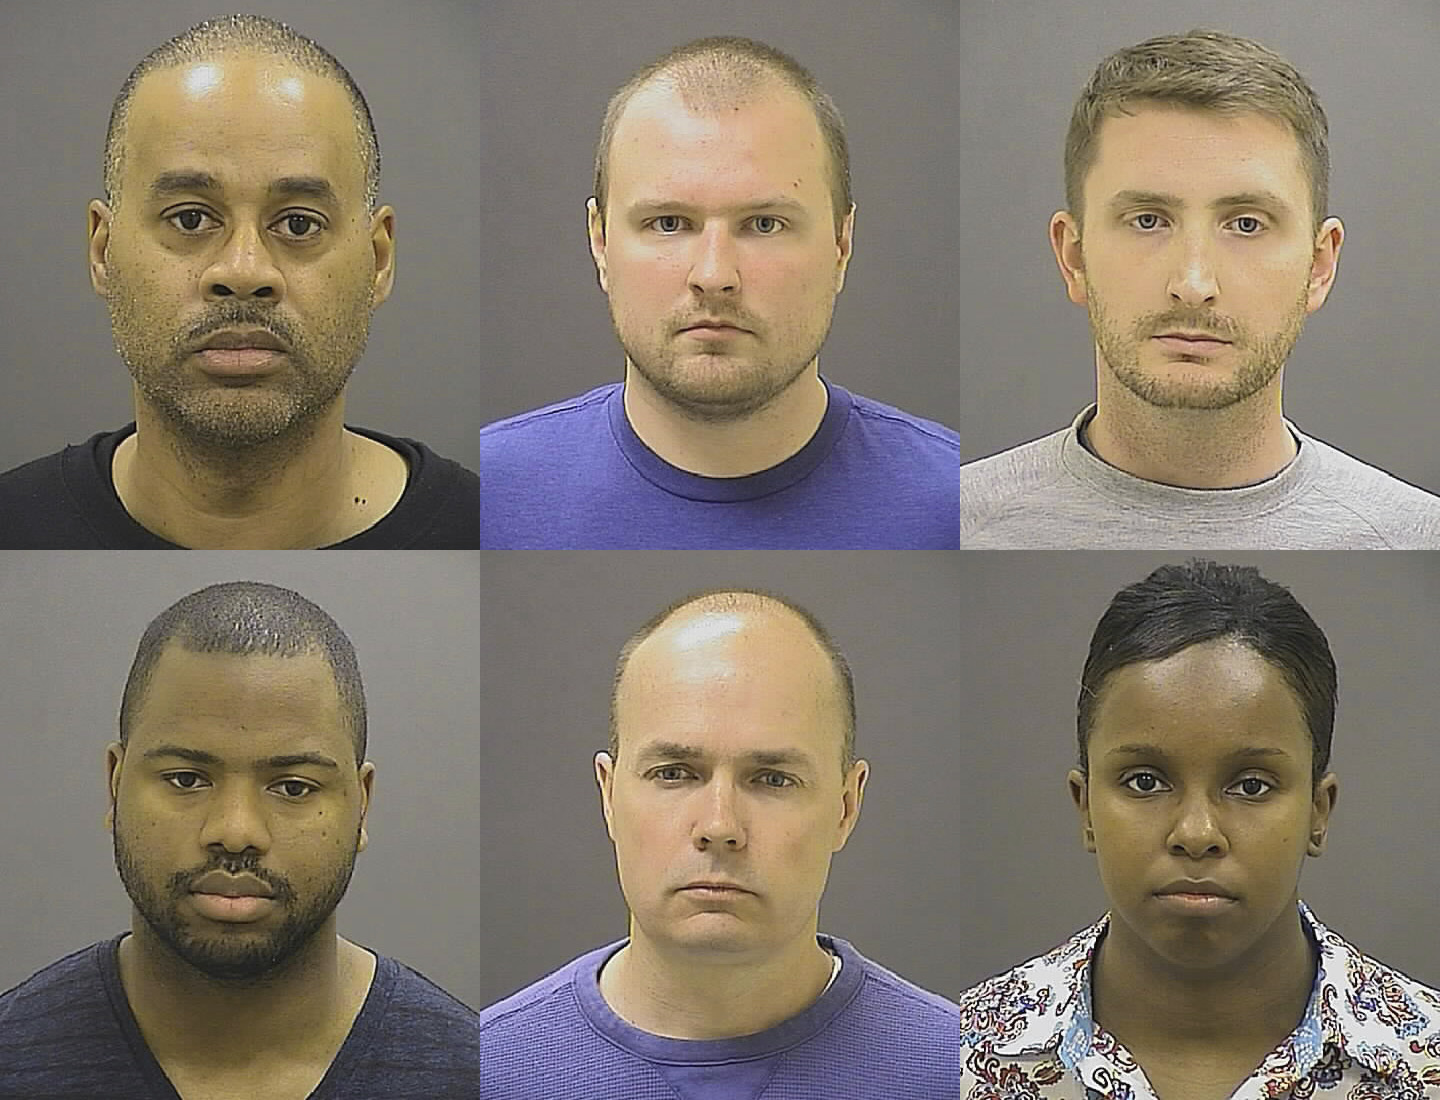 DOJ Won't Charge Police officers In Freddie Gray Case